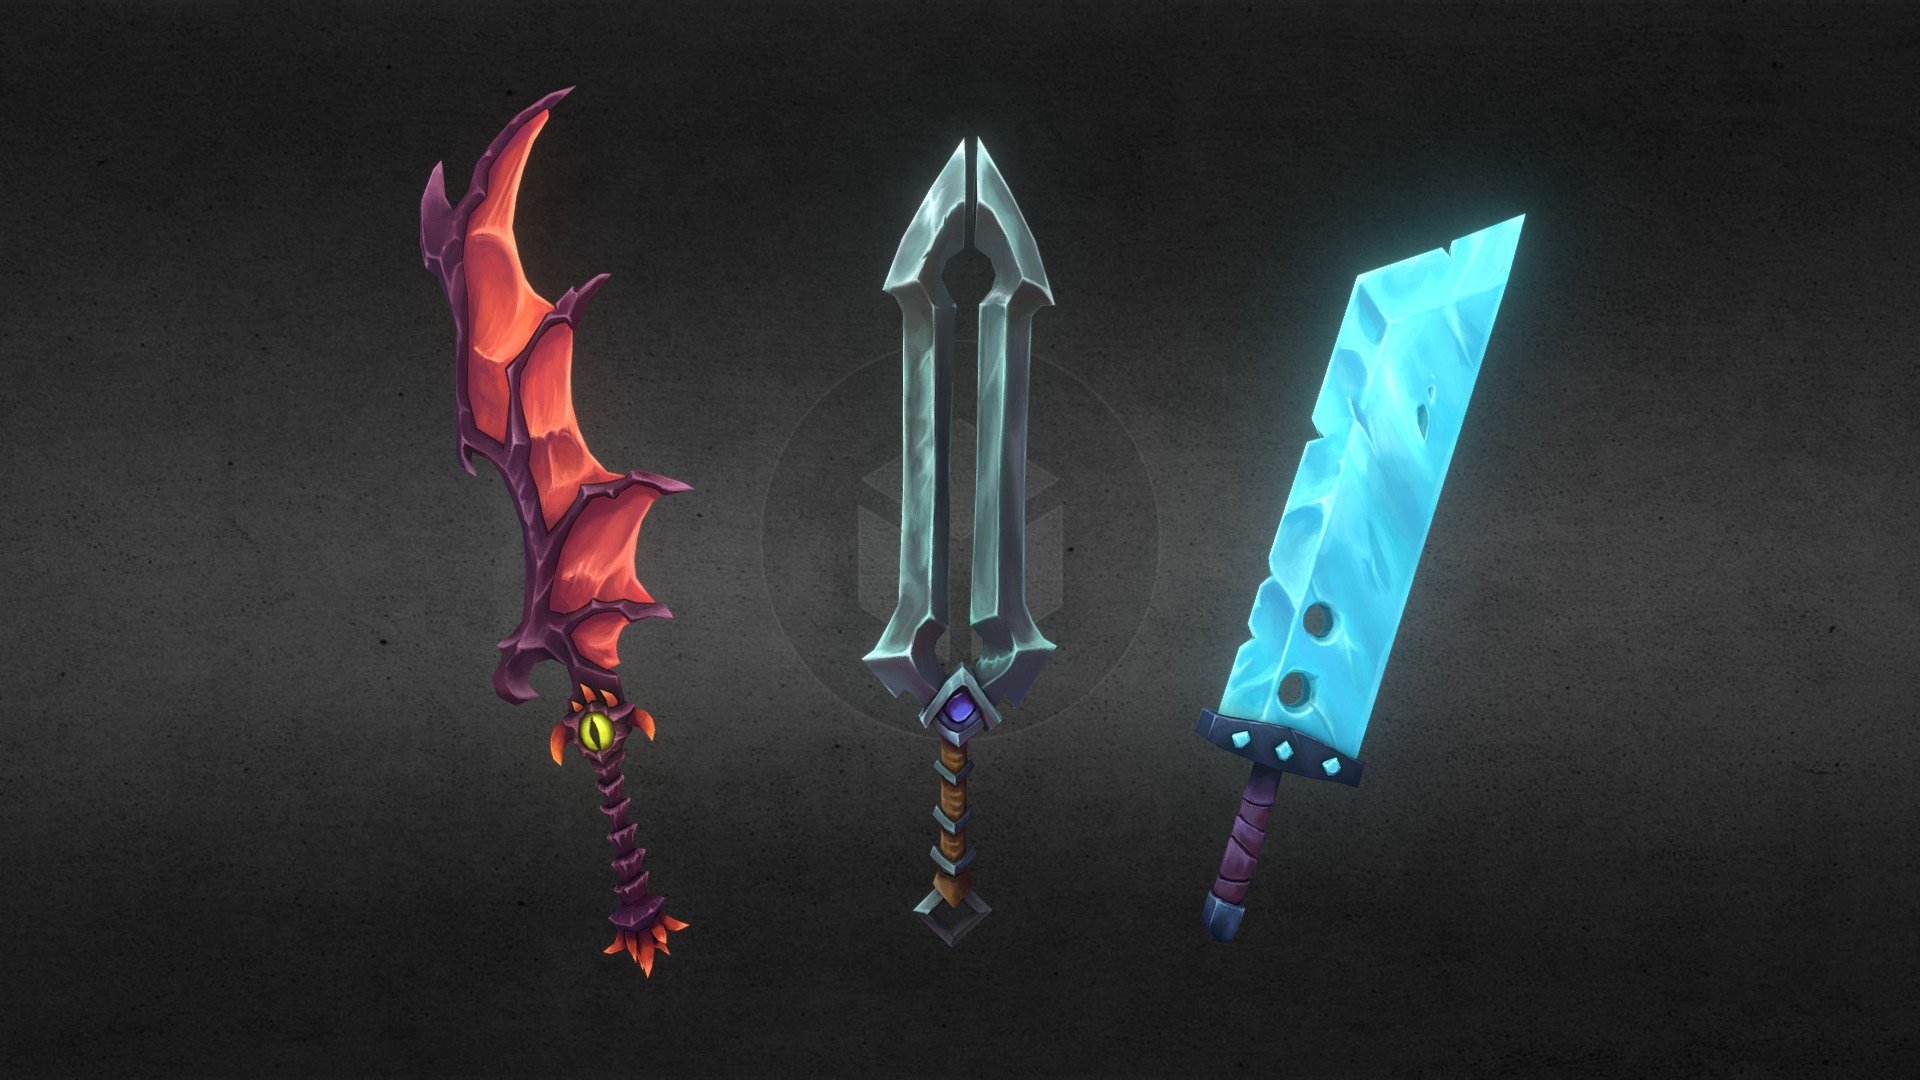 Swords
This was a just for fun speedmodelling-session. Total worktime was like 5 to 6 hours (just the modelling 1 hour)                      

Modelled in Blender, textured in 3D-Coat and Photoshop.  

The concept is from Joe Madureira (https://www.artstation.com/joemadx). 

Showcased here: https://www.artstation.com/artwork/Zbg0G - Swords - 3D model by JanPohl 3d model